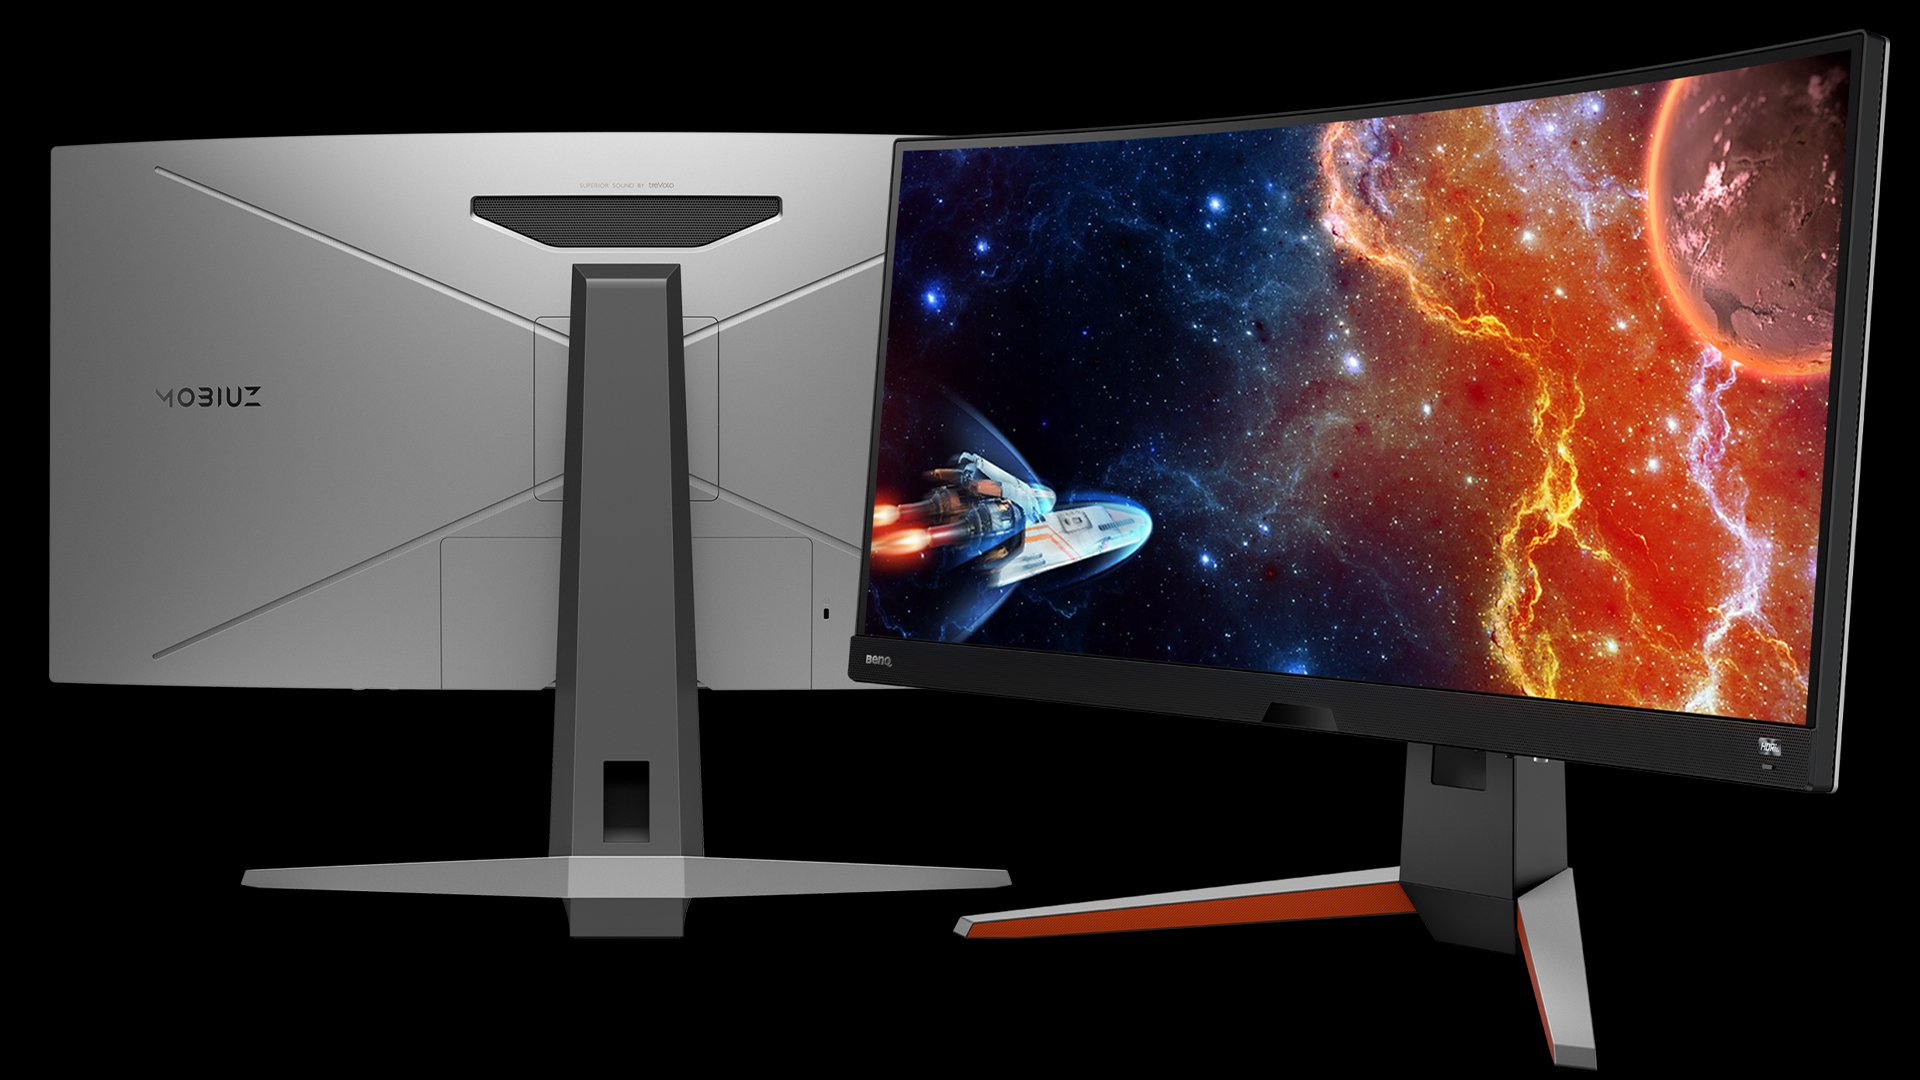 benq mobiuz 1900r ultrawide curved gaming monitor ex3415r imagine a new reality